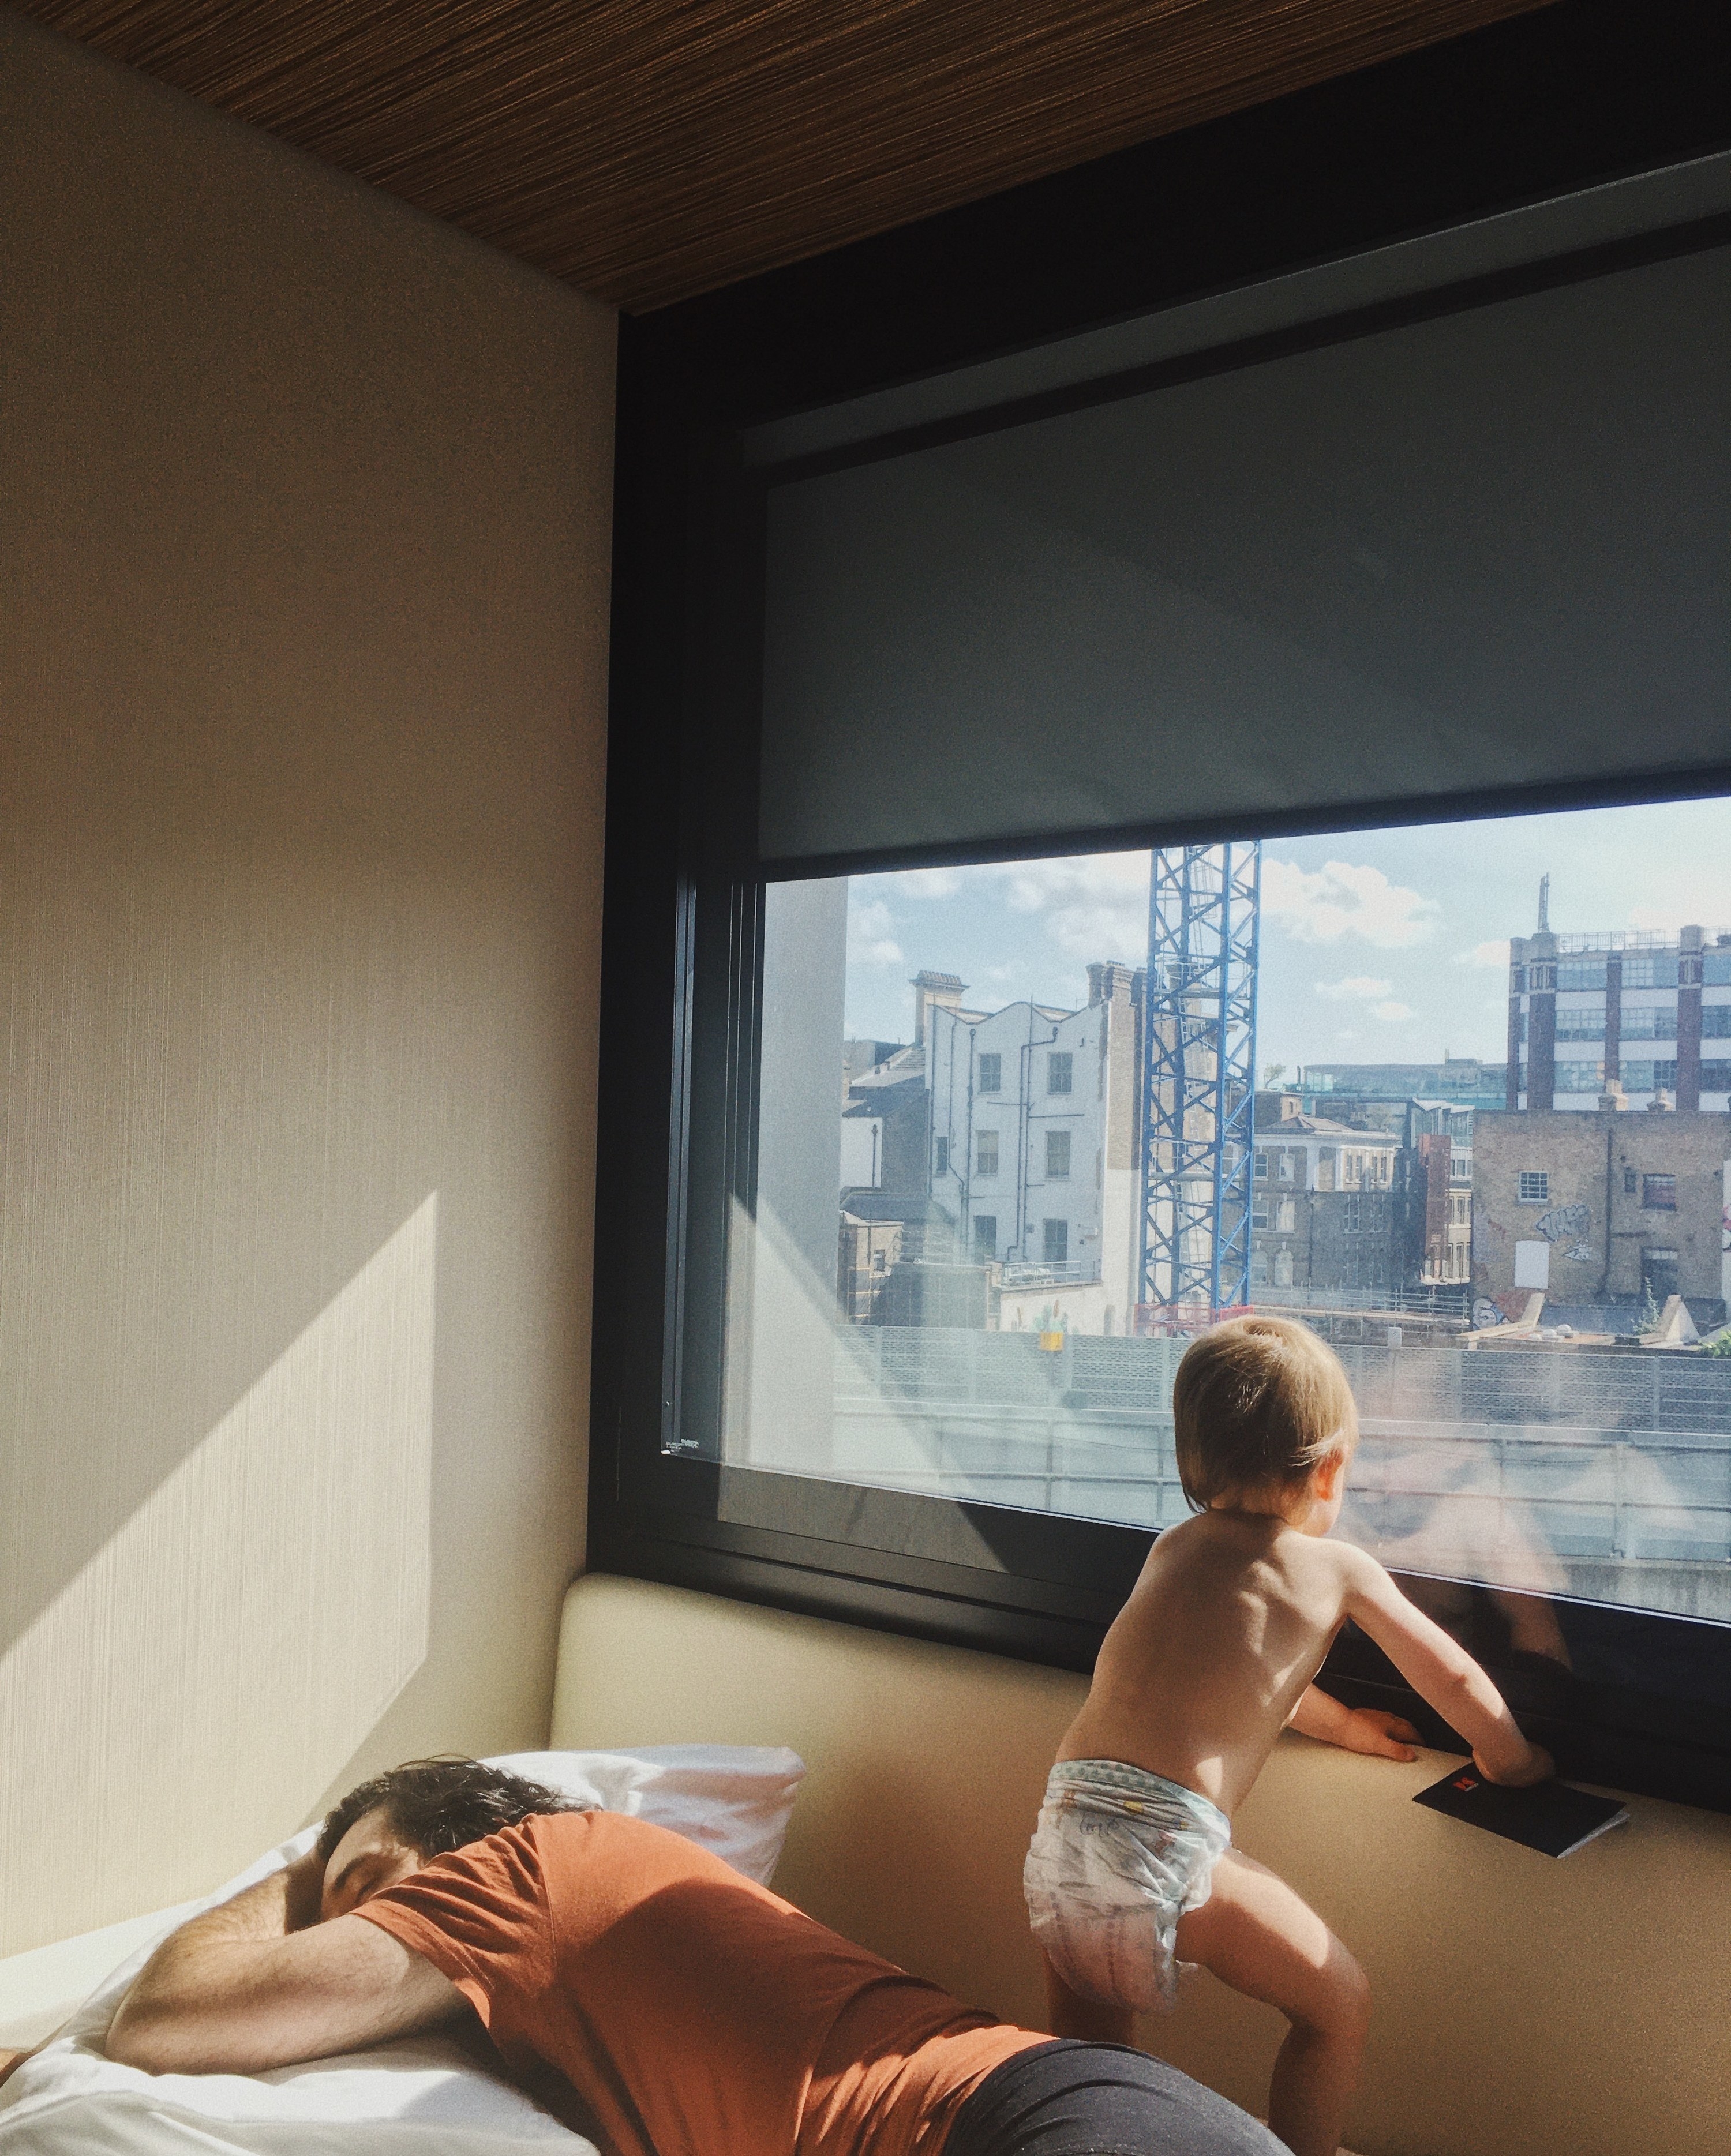 A father sleeps while his small child looks out a window overlooking a city